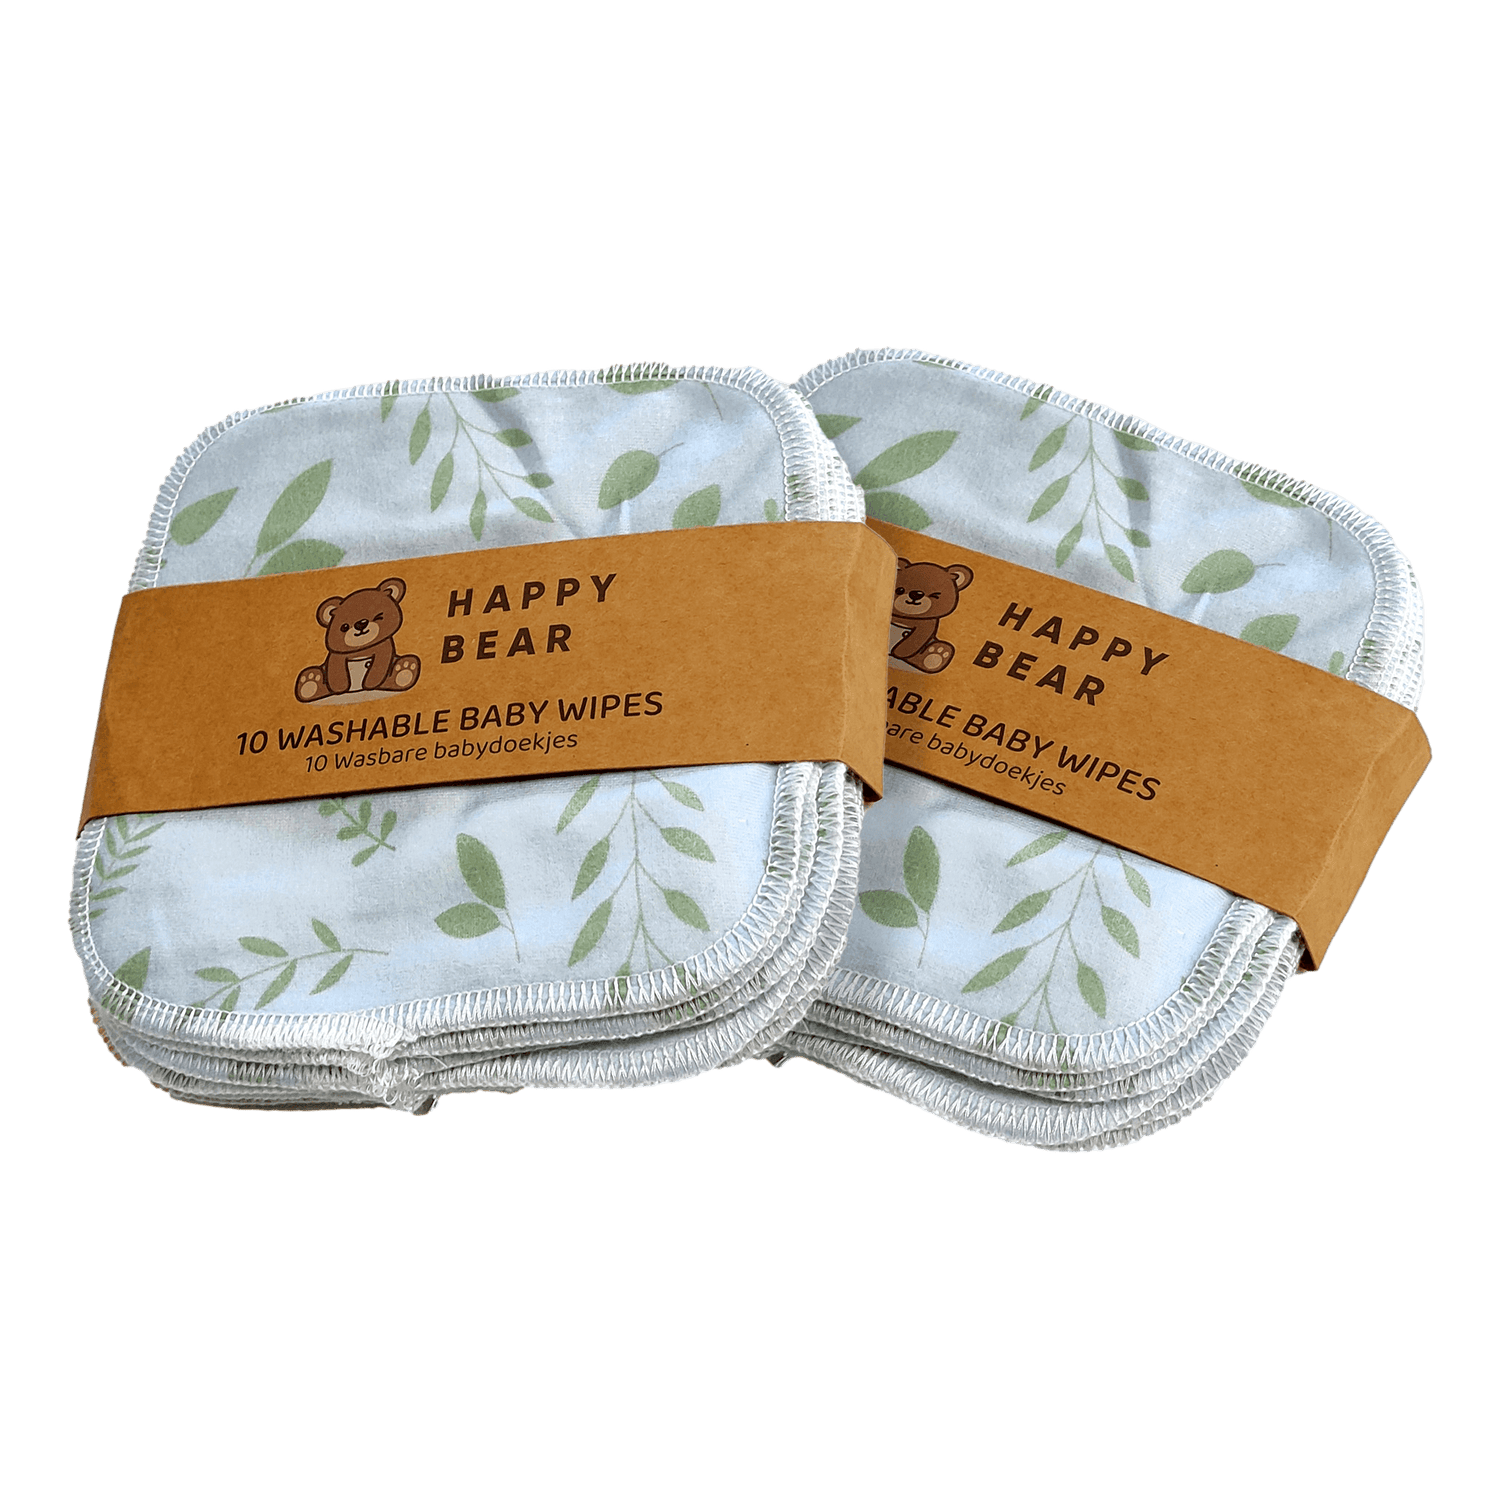 Baby wipes bamboo print - 20 pieces